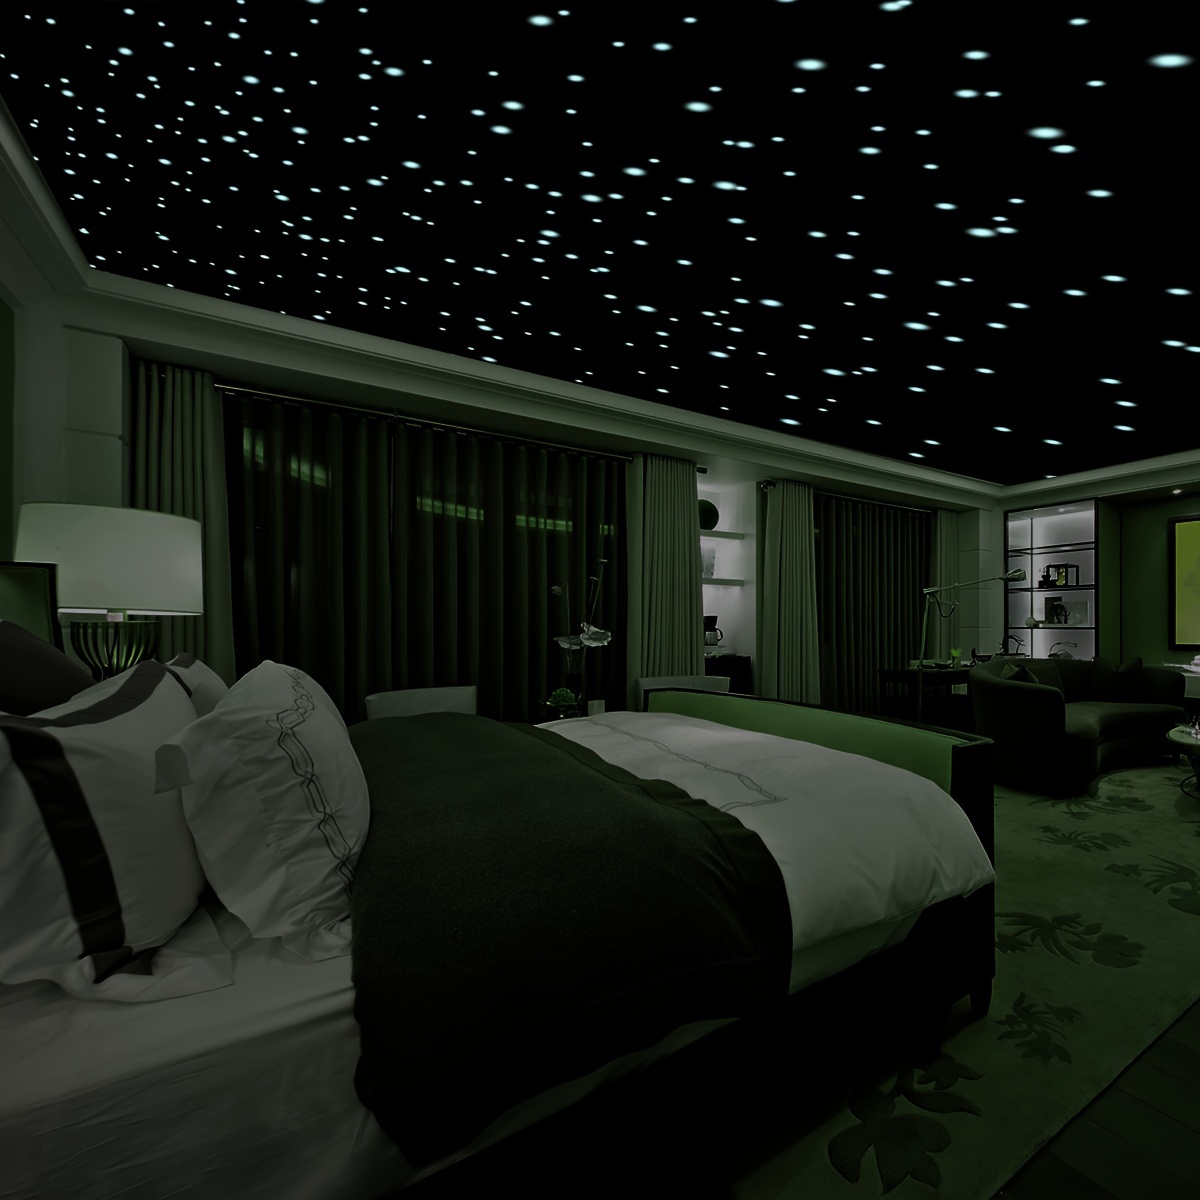 

Realistic 3d Domed Glow In The Dark Stars 606 Dots For Starry Sky Home Decor Stickers For Bedding Room